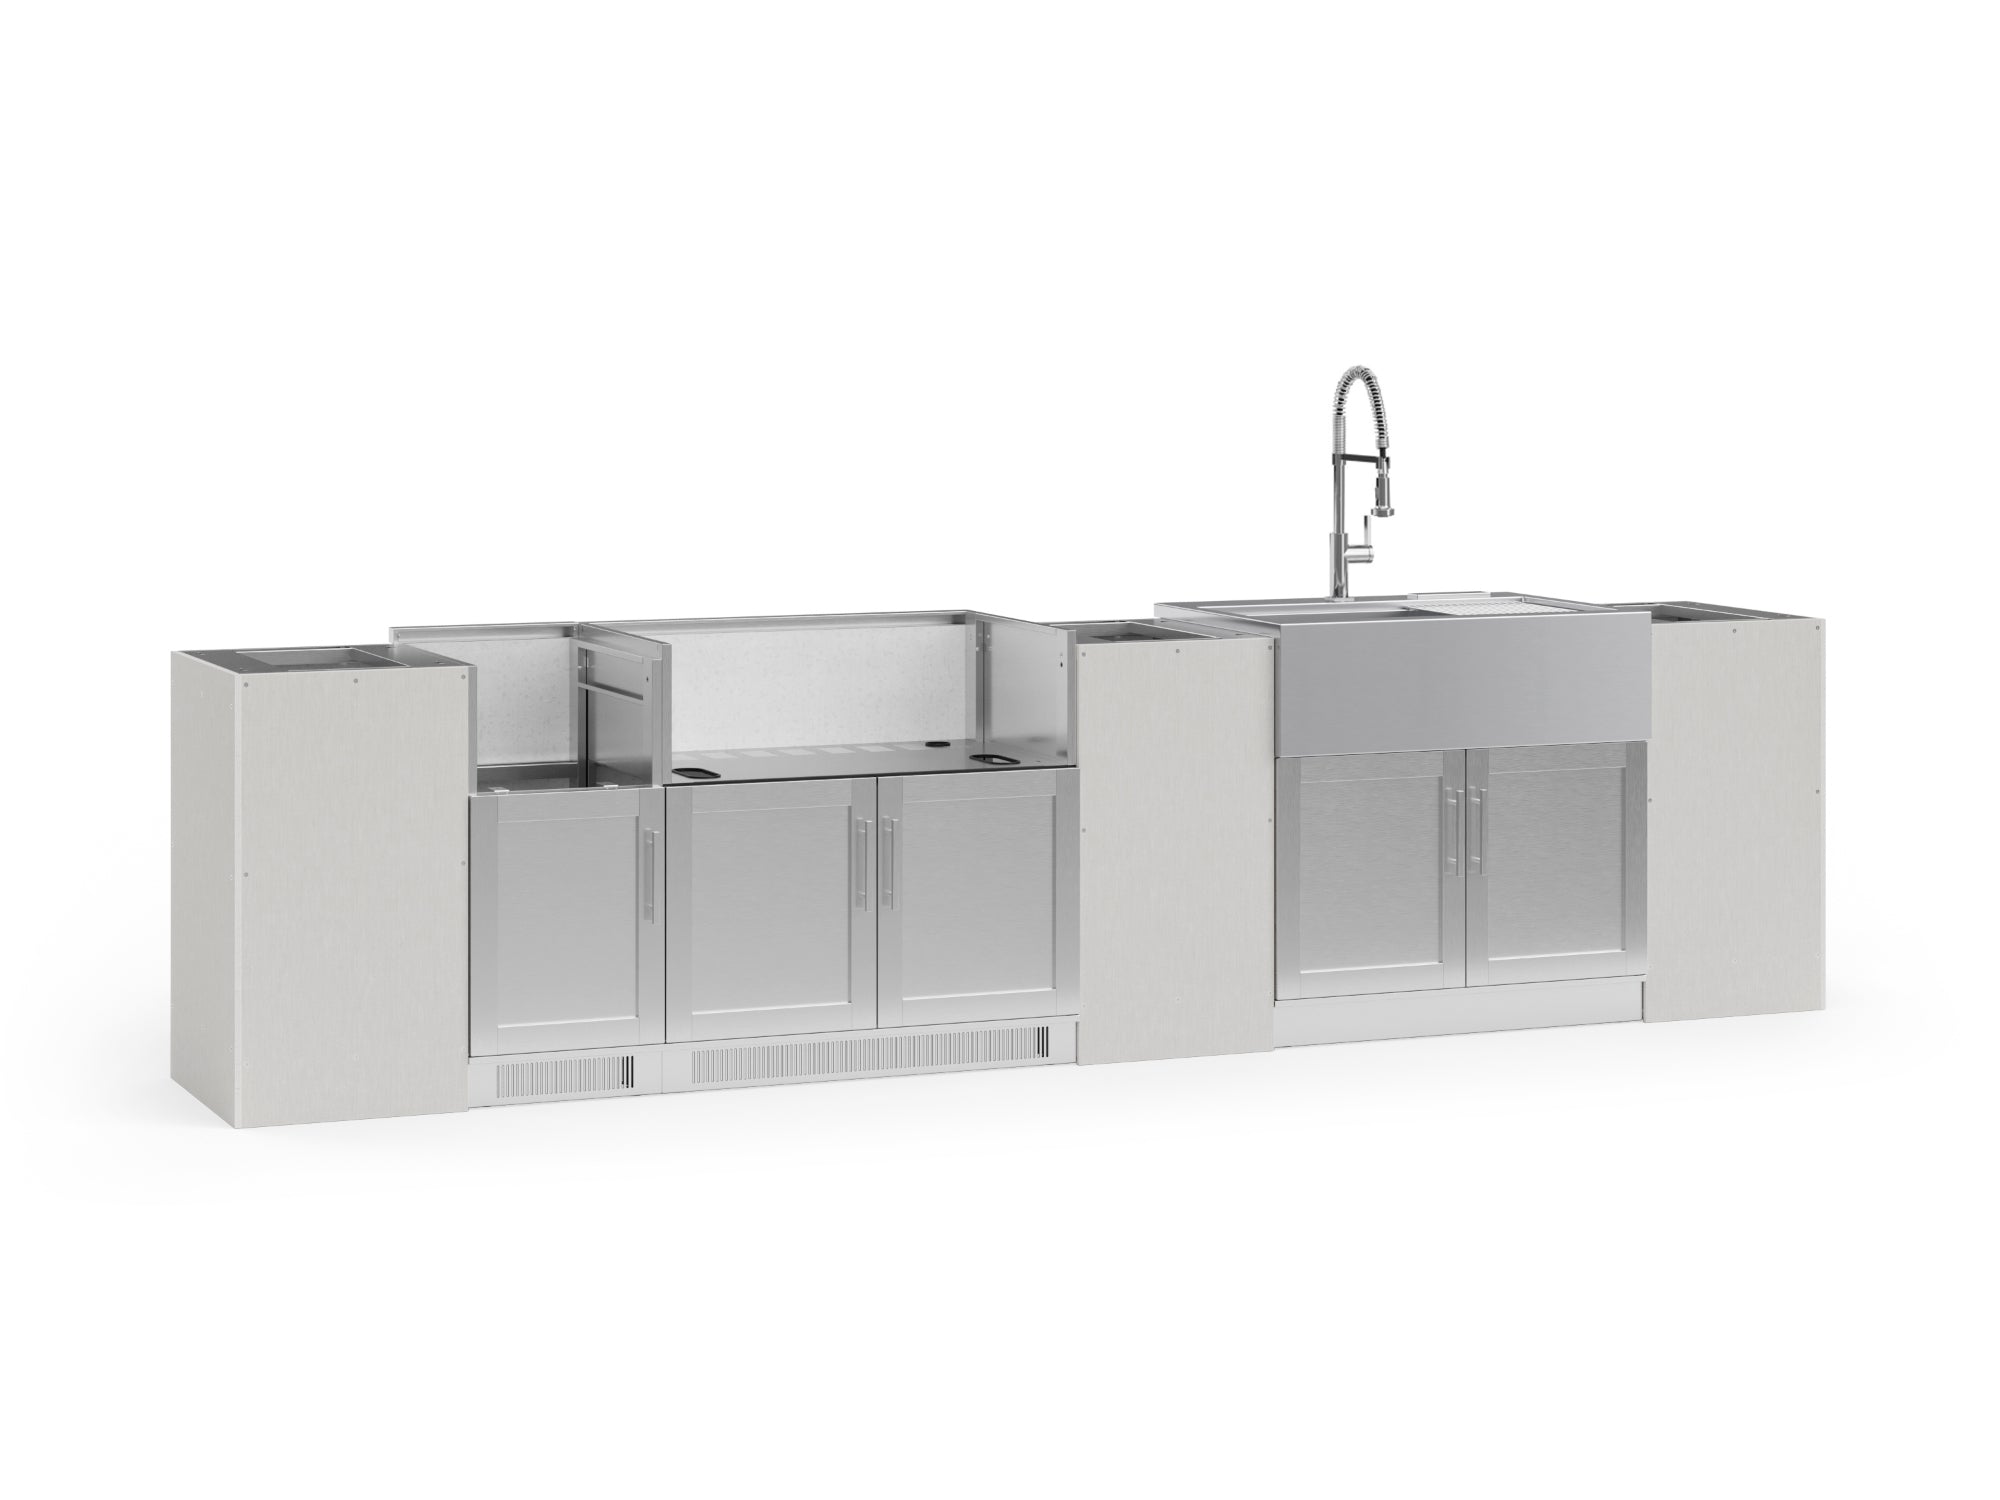 NewAge | Outdoor Kitchen Signature Series 8 Piece Cabinet Set With Dual side Burner, Sink and Grill Cabinet